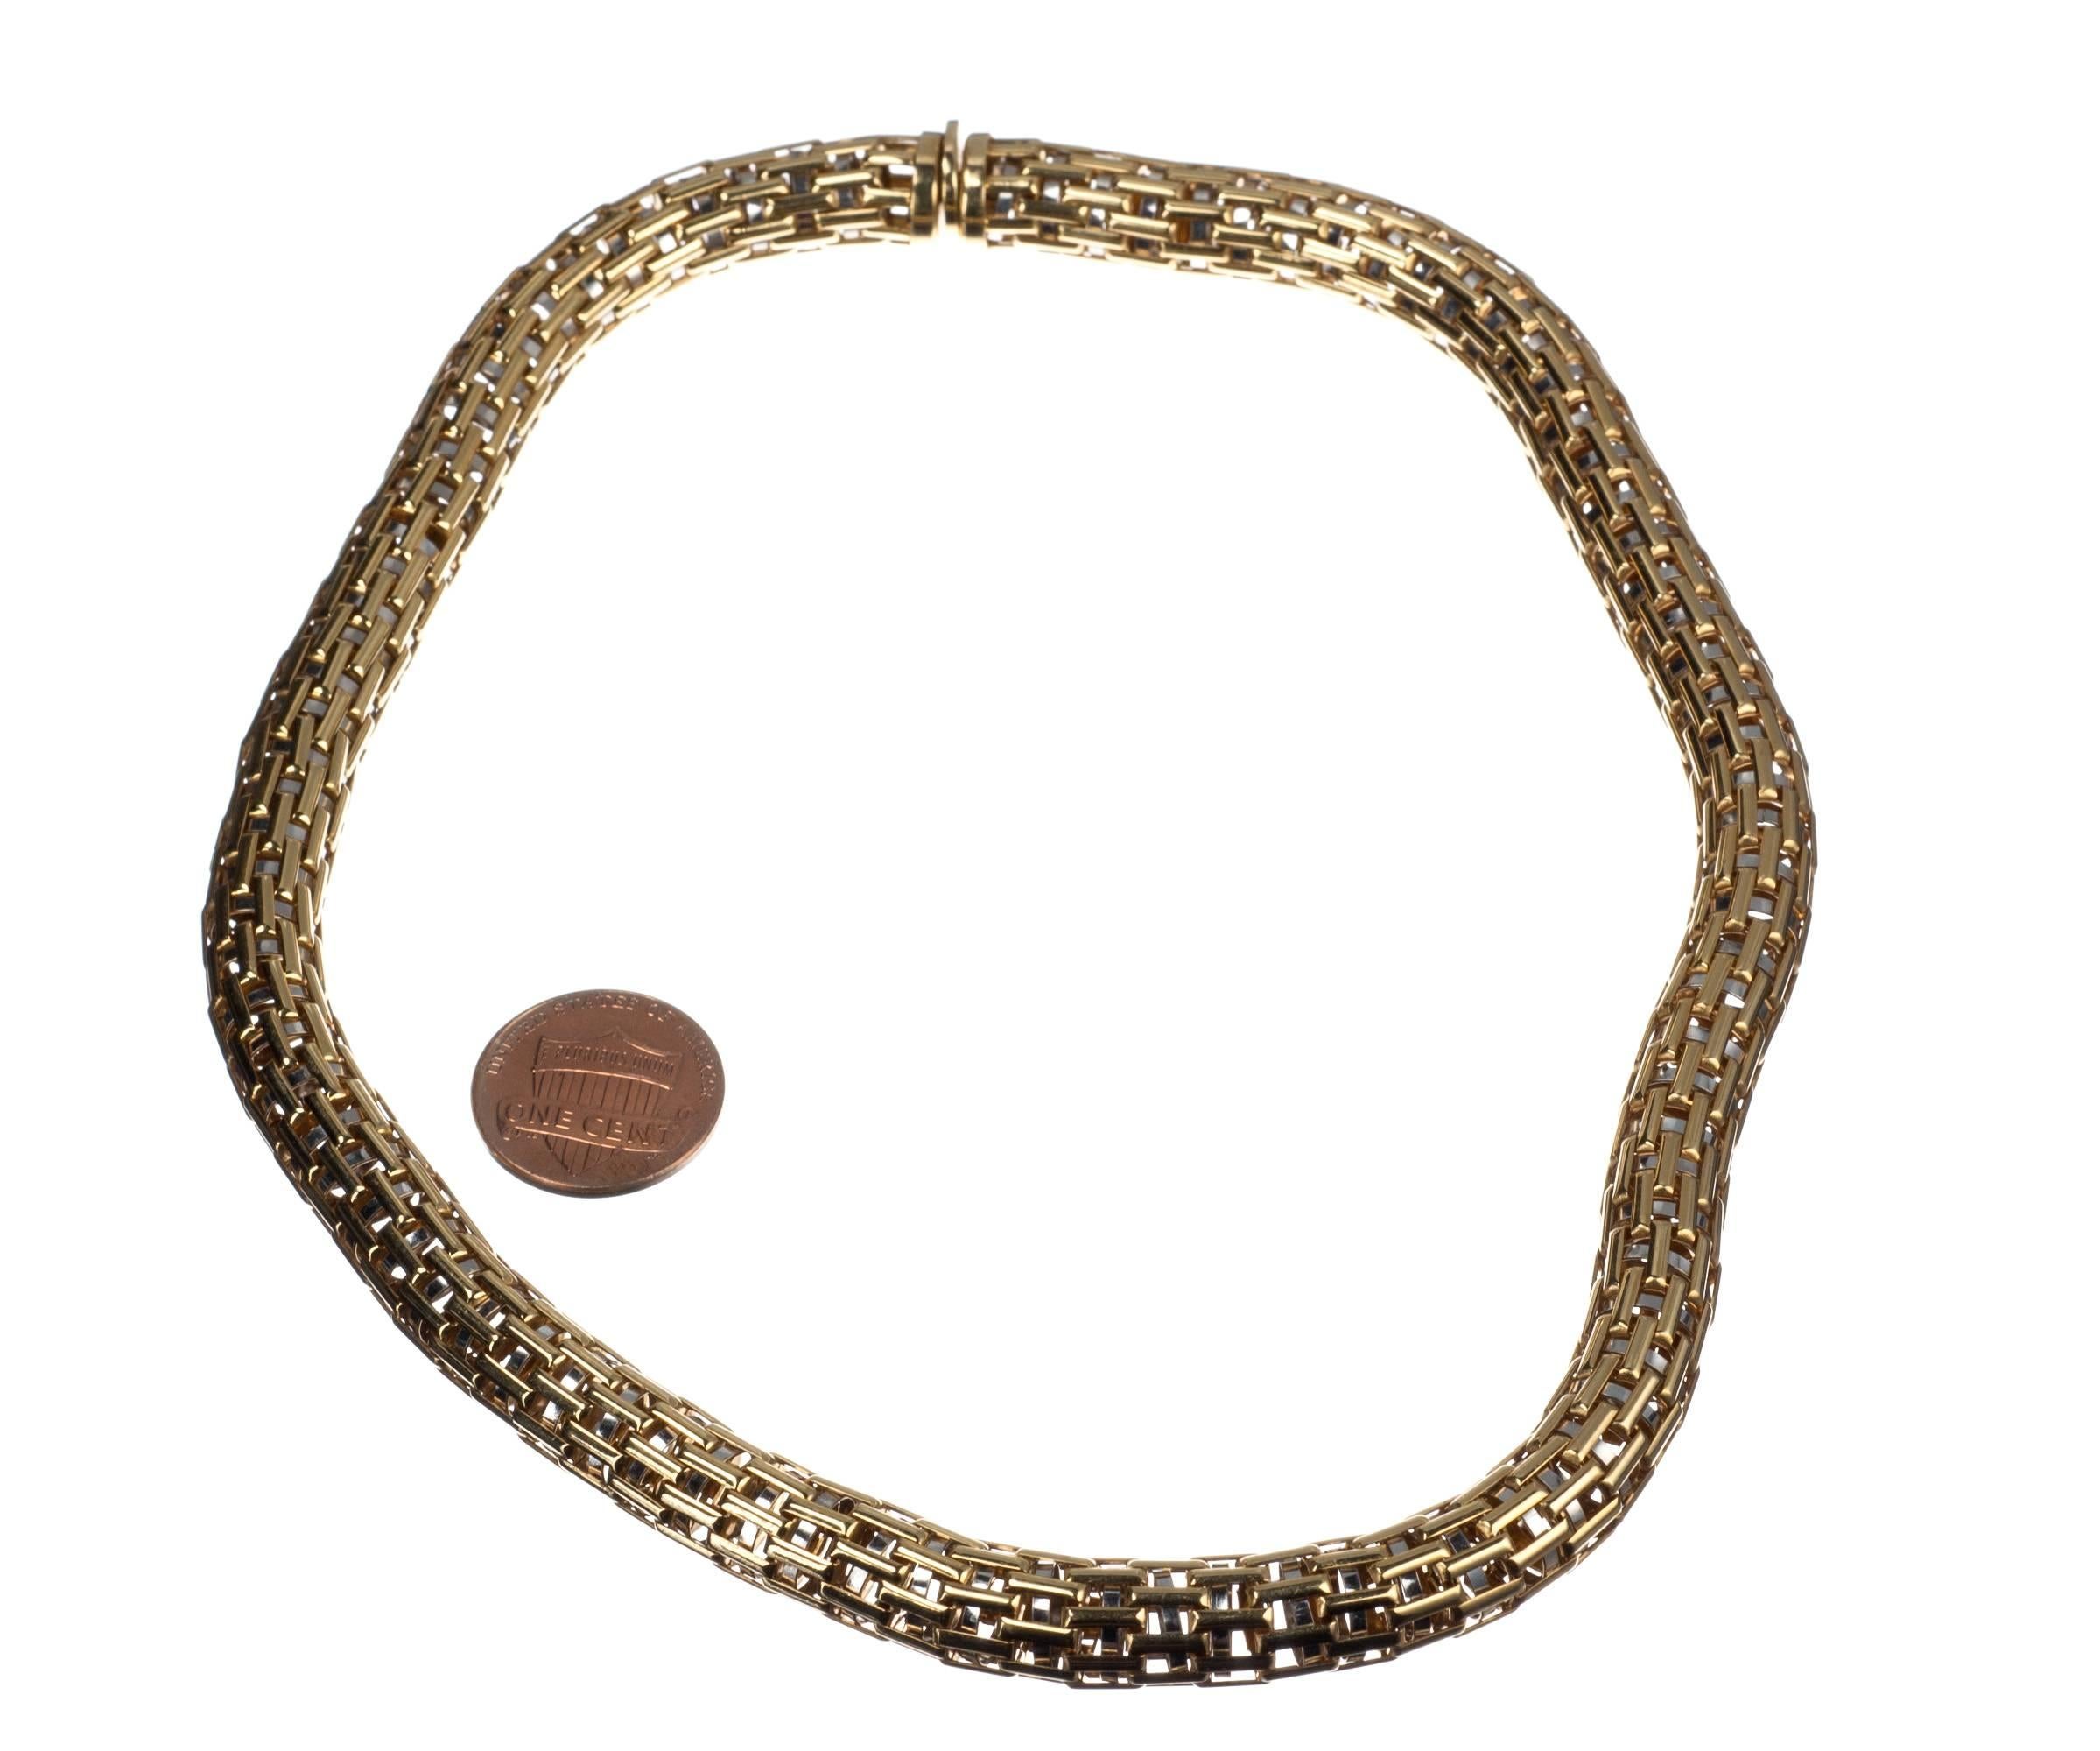 An intricate marvel of craftsmanship from Italian designer VAID, this 18-karat yellow gold choker’s smooth, woven exterior belies its complexity. Free-floating 18-karat white gold rings nestled into each woven segment add a subtle shimmer and soft